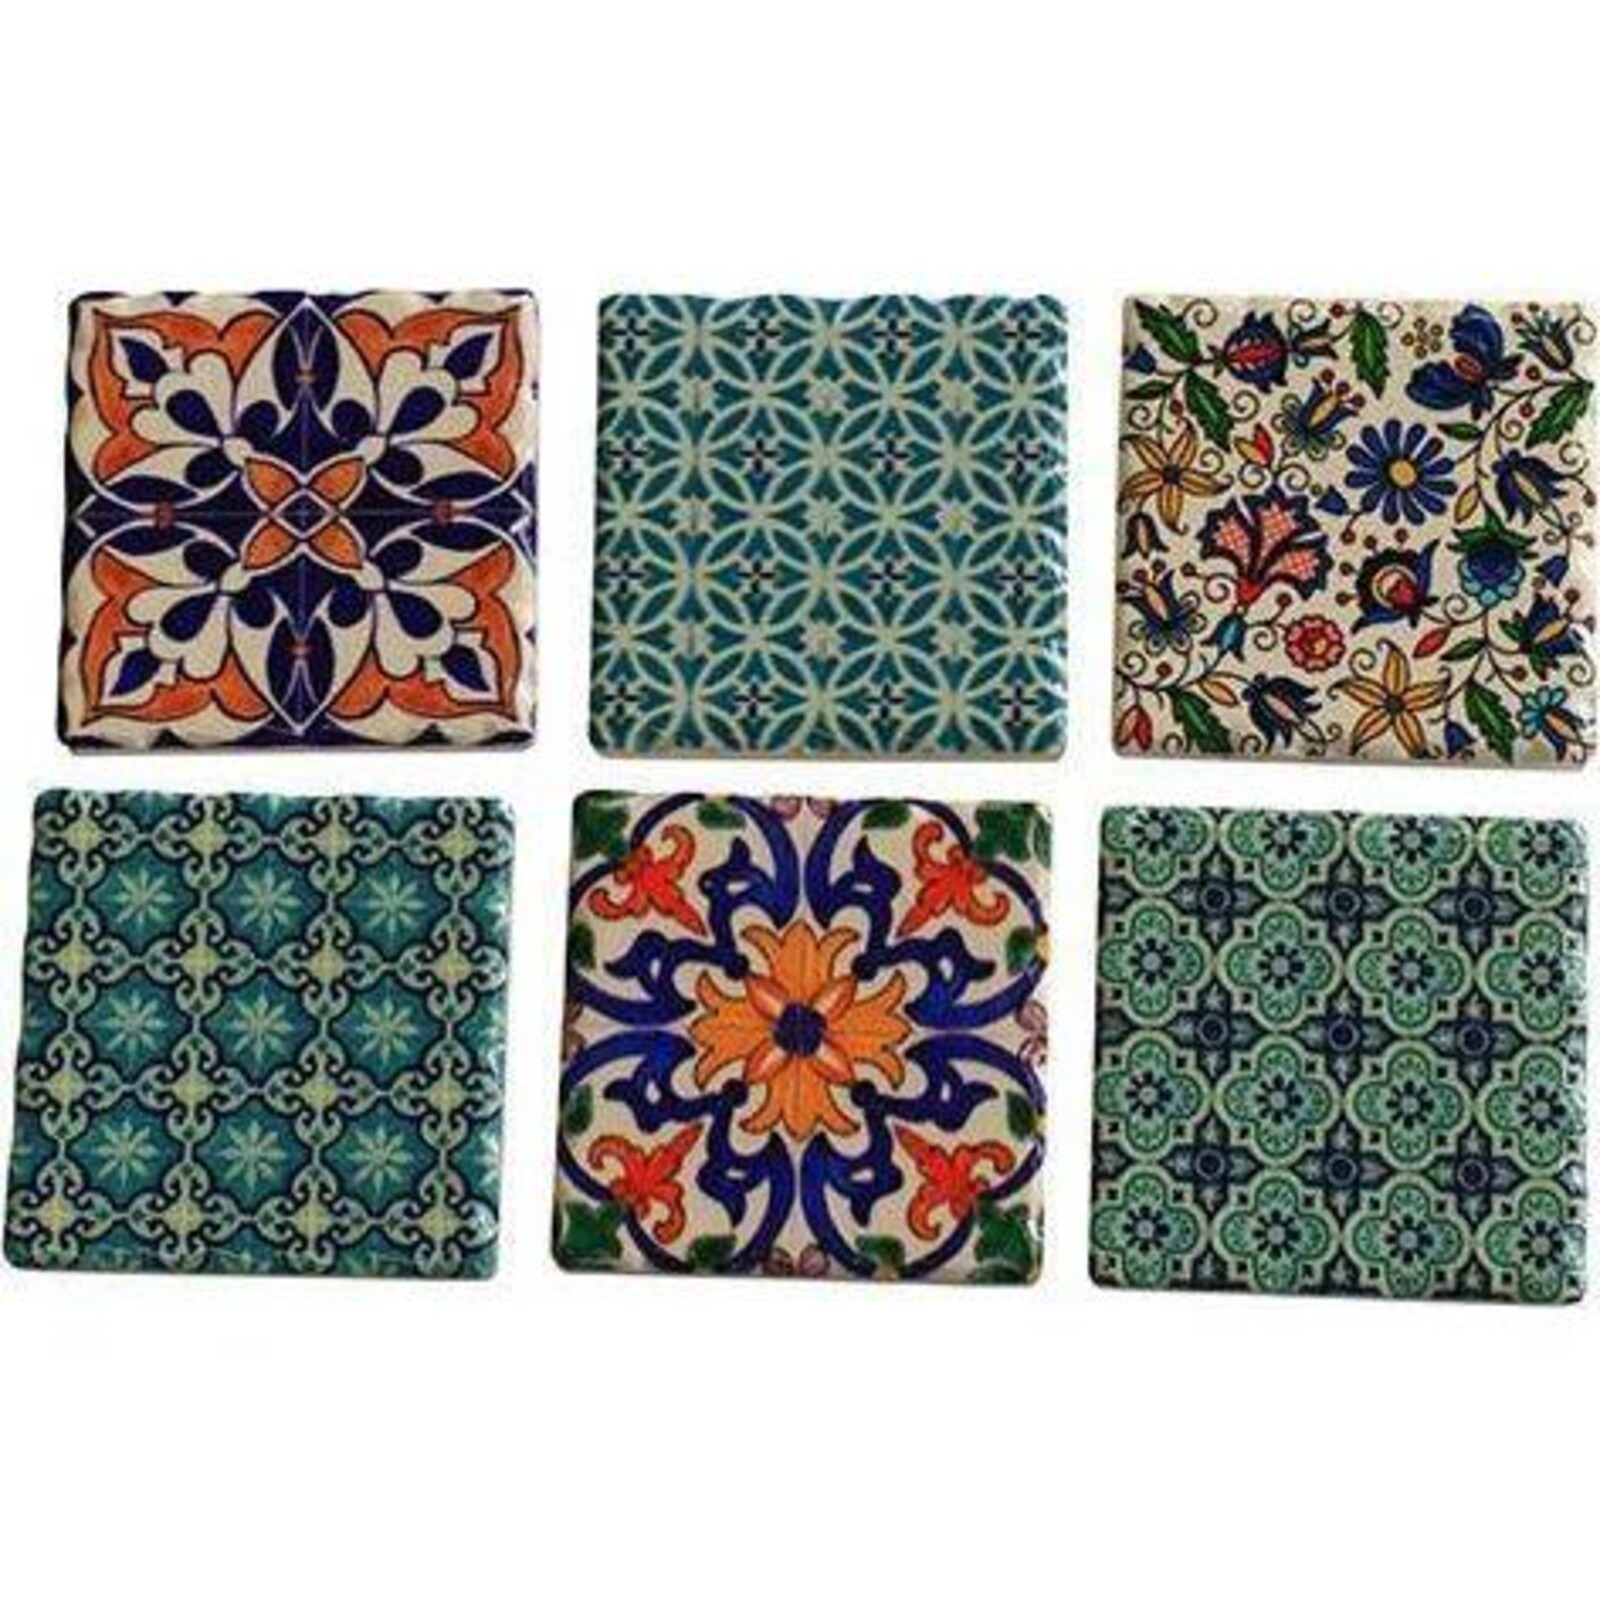 Magnets Persia Pattern S/6